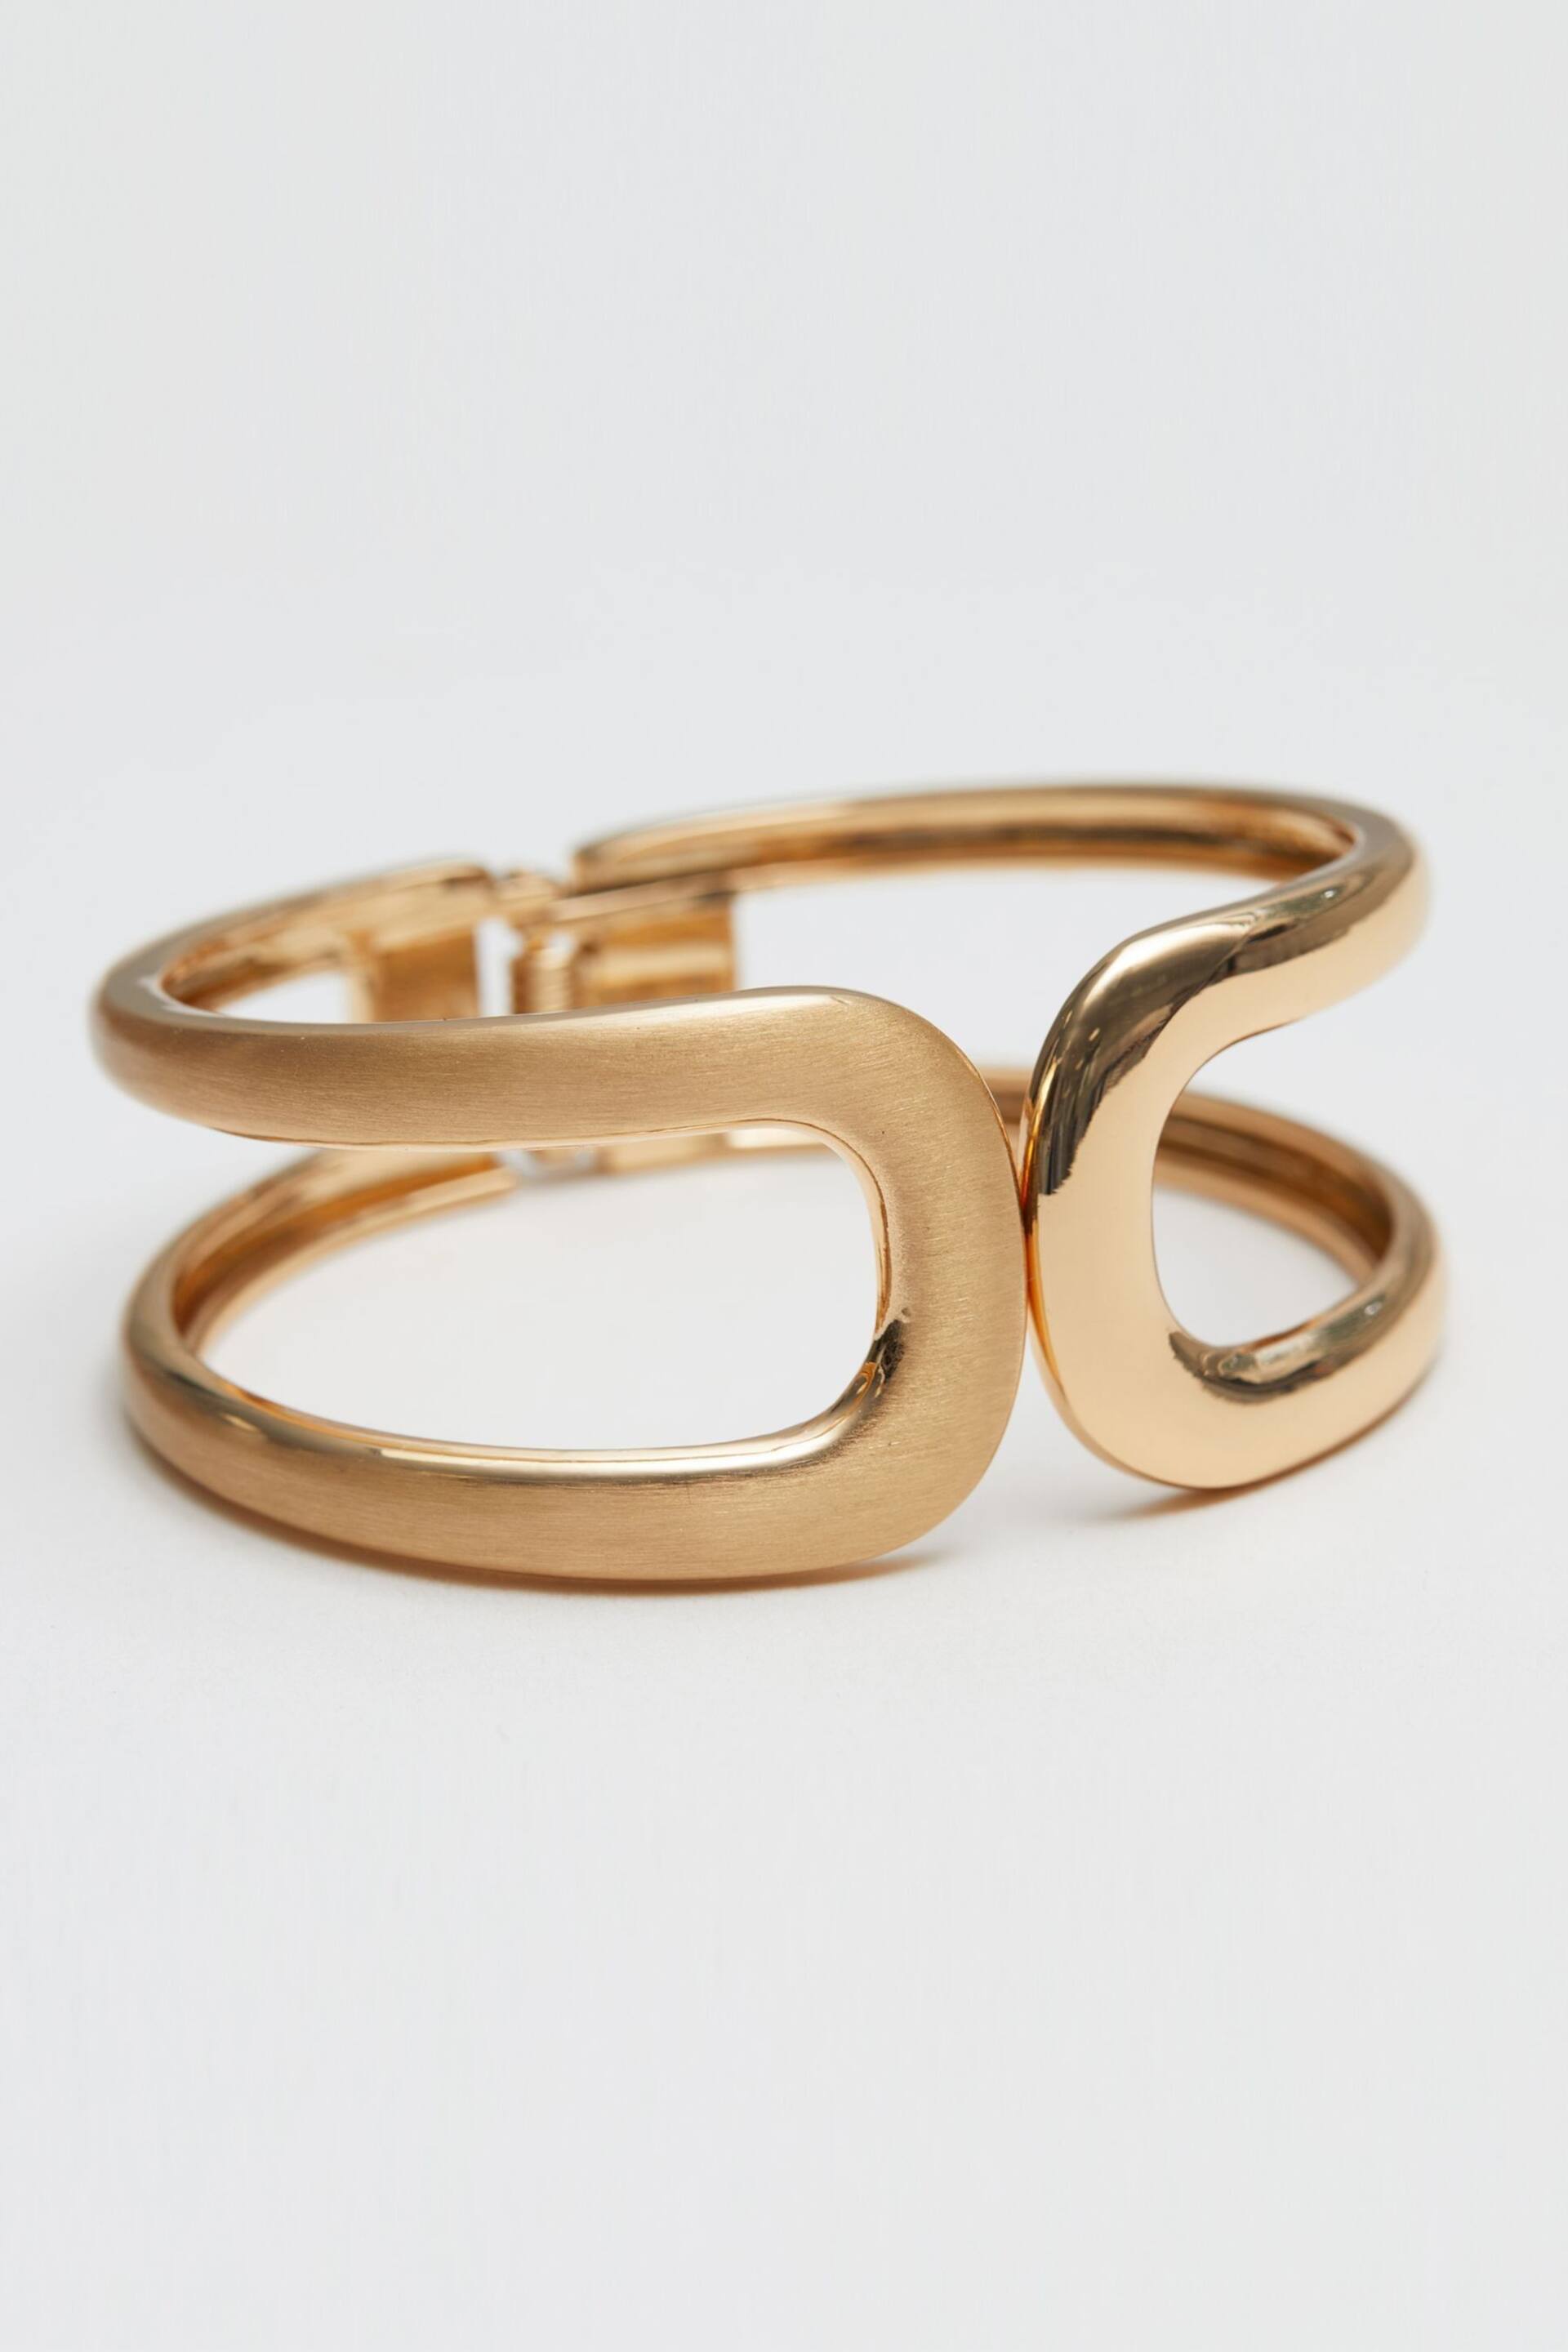 Mood Gold Tone Polished And Satin Open Cuff Bracelet - Image 1 of 1